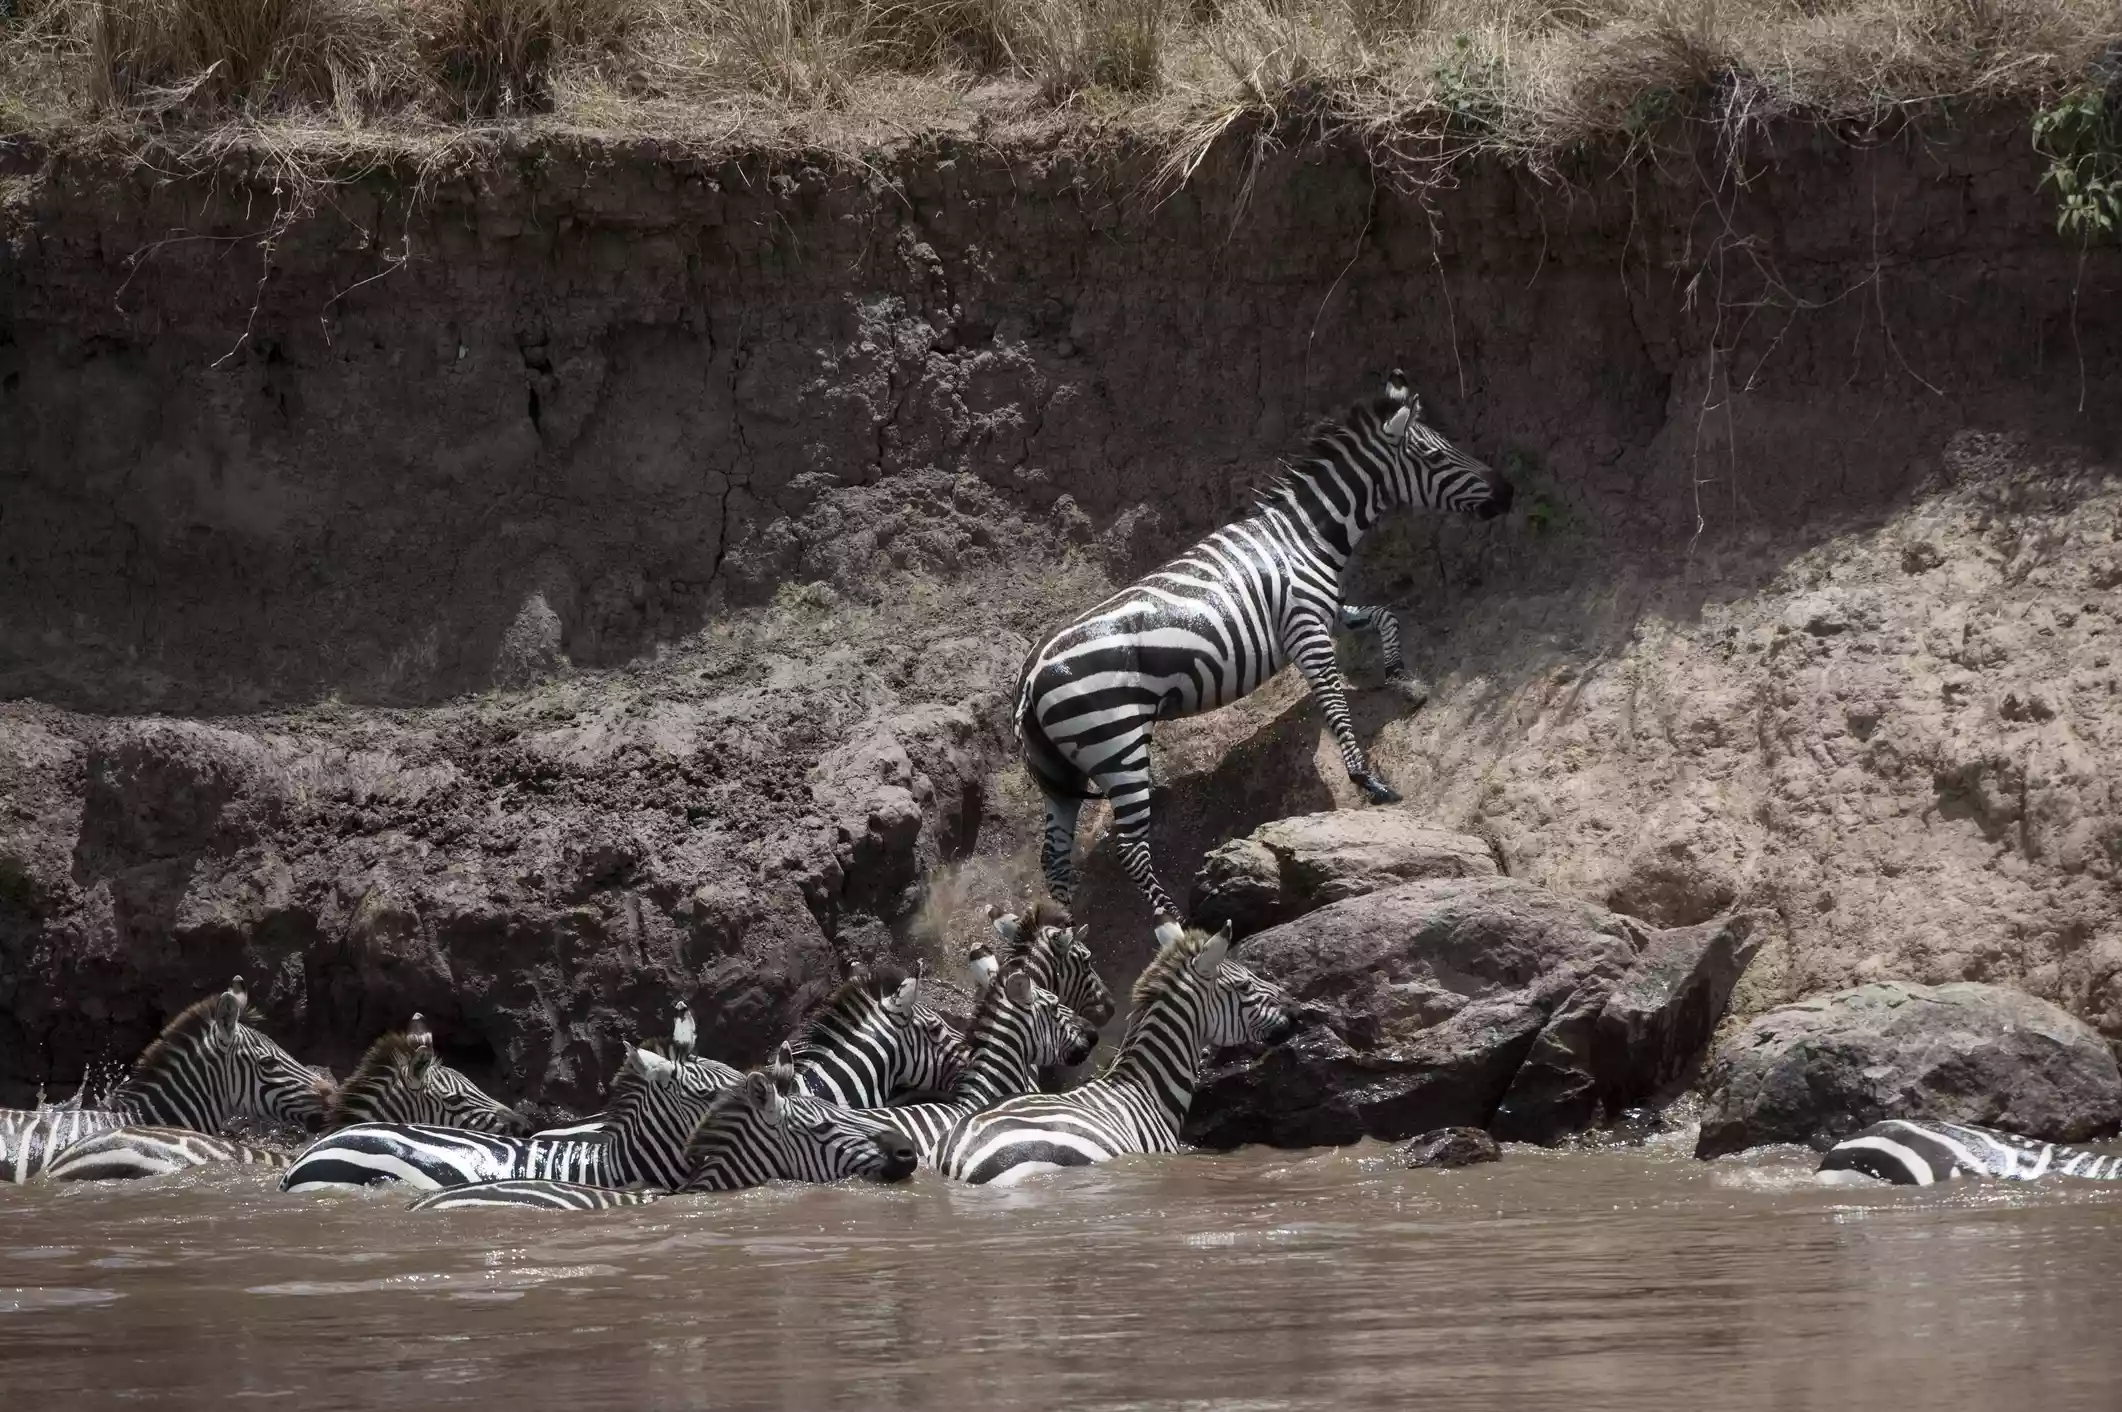 A plains zebra climbing up a riverbank in Africa while other zebras wait in the river